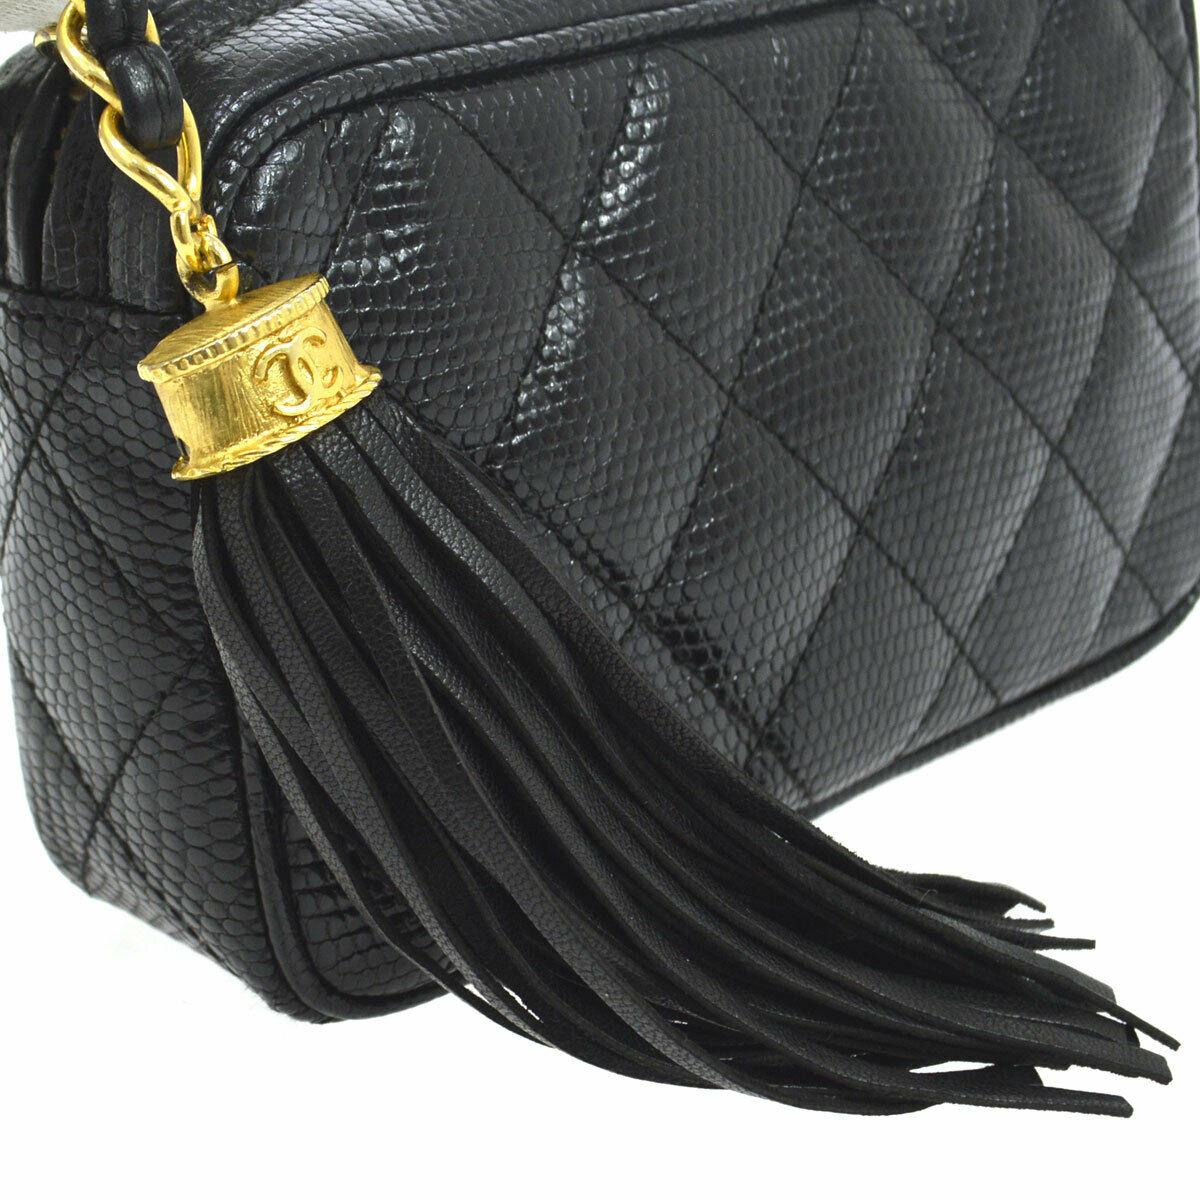 Chanel Black Lizard Exotic Leather Gold Tassel Small Evening Clutch Bag

Lizard
Gold tone hardware
Leather lining
Date code present
Made in France
Measures 6.25